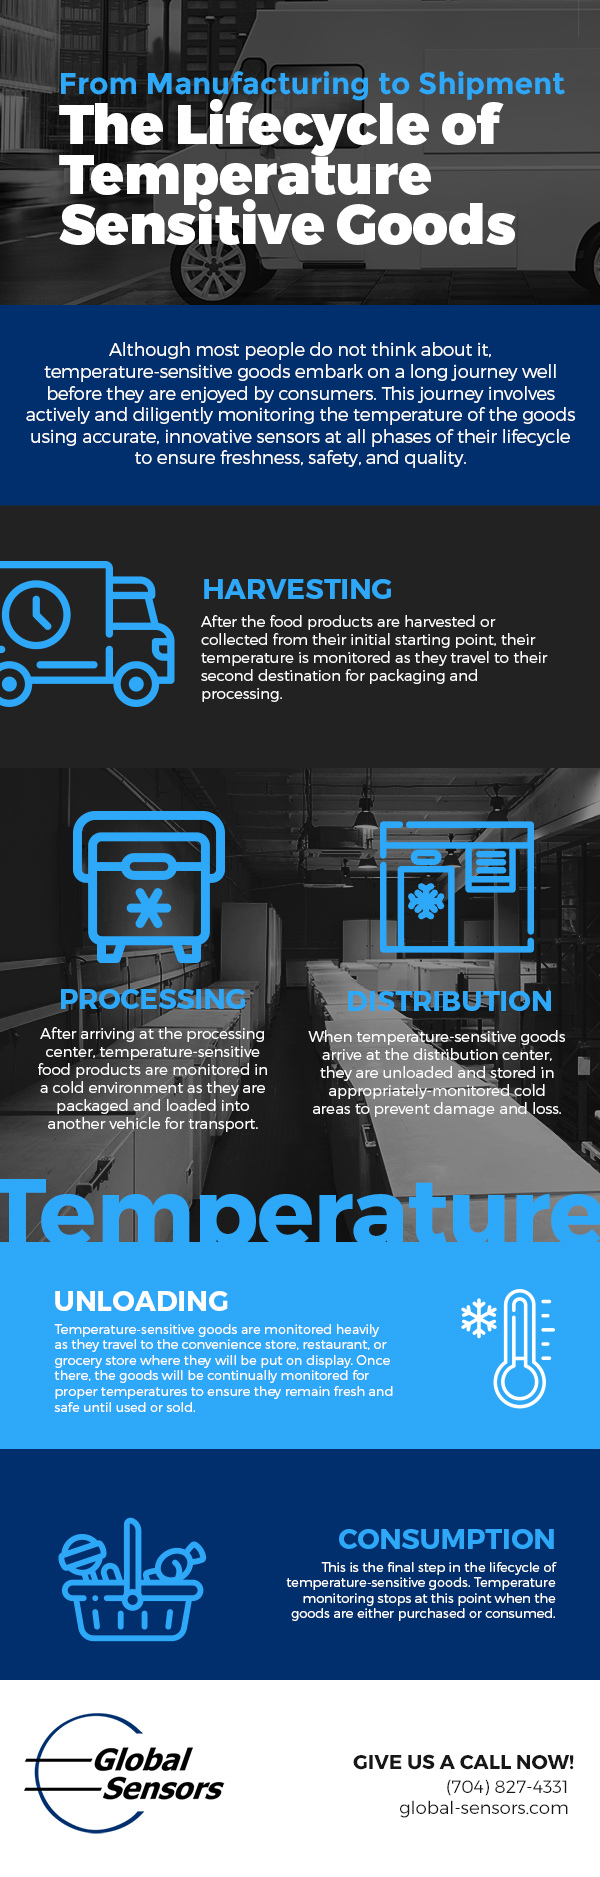 From Manufacturing to Shipment: The Lifecycle of Temperature-Sensitive Goods [infographic]